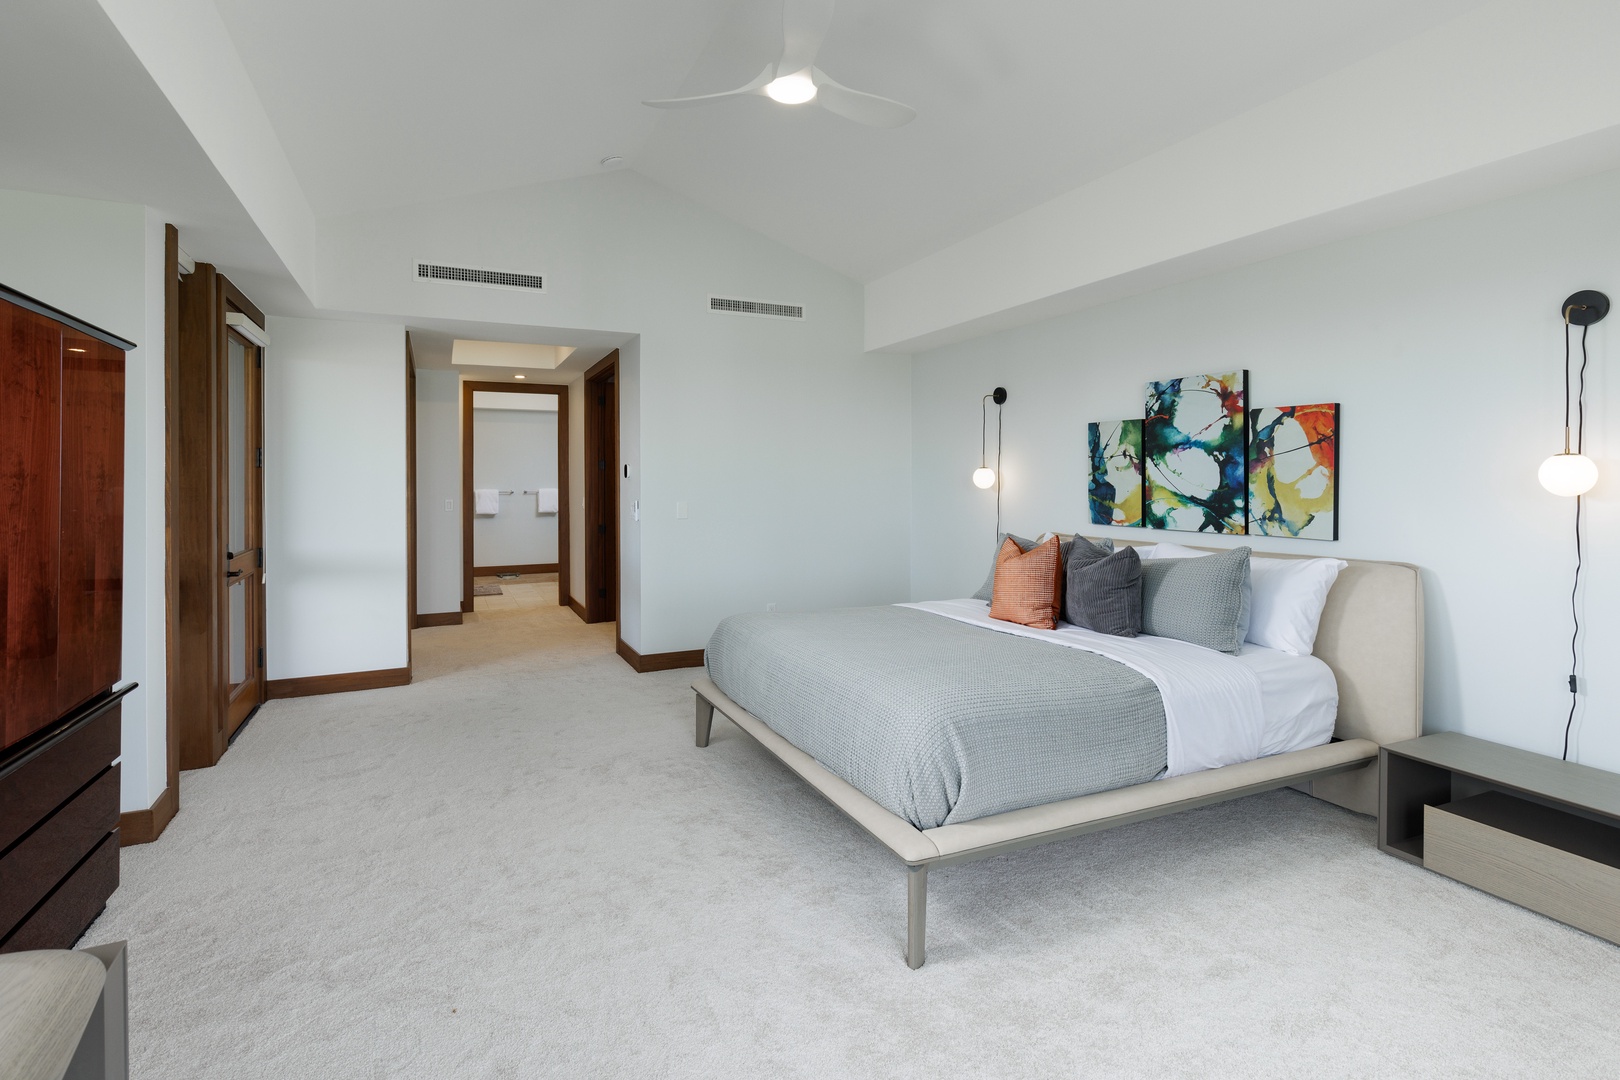 Kailua Kona Vacation Rentals, 3BD Fairways Villa (104A) at Four Seasons Resort at Hualalai - Minimalist-modern style for a bright and airy suite.